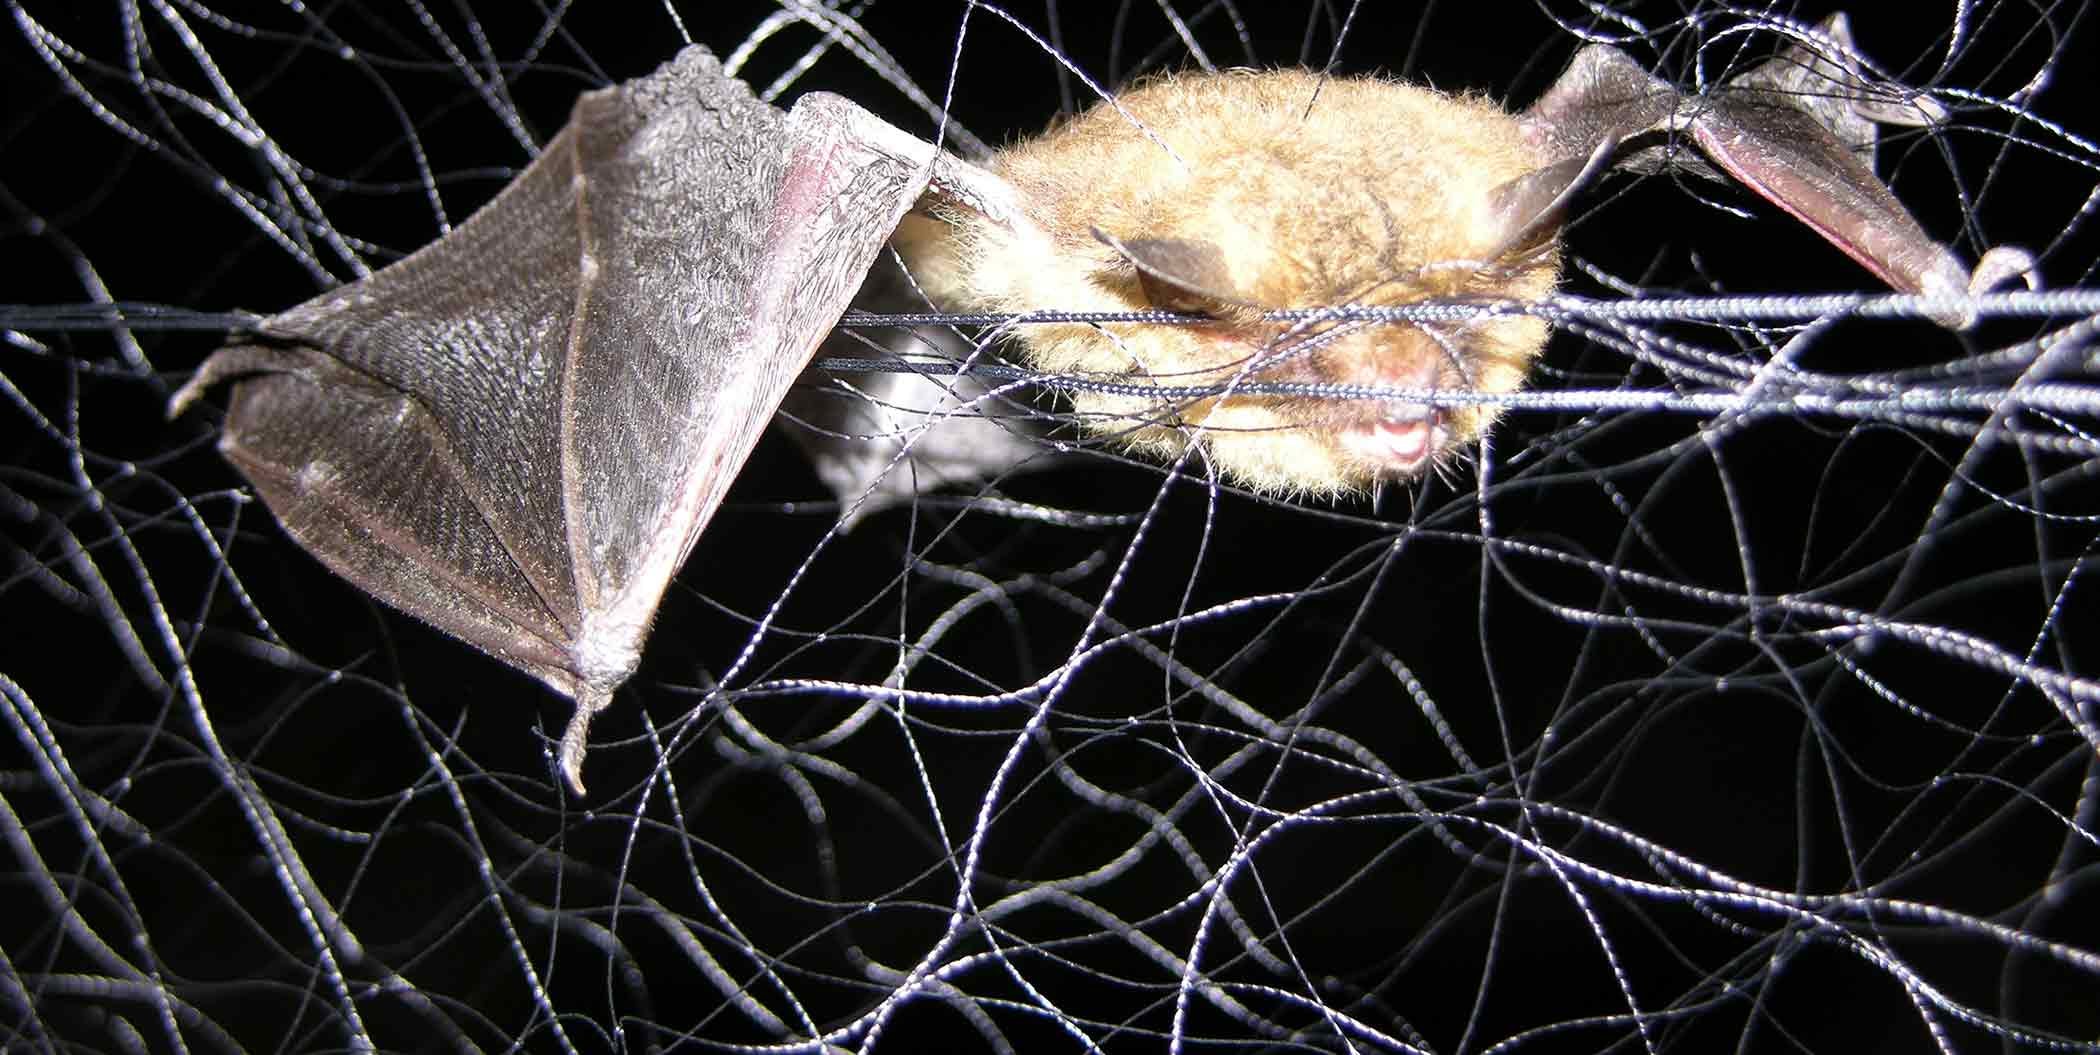 Northern Long-Eared Bats Impact Infrastructure Projects